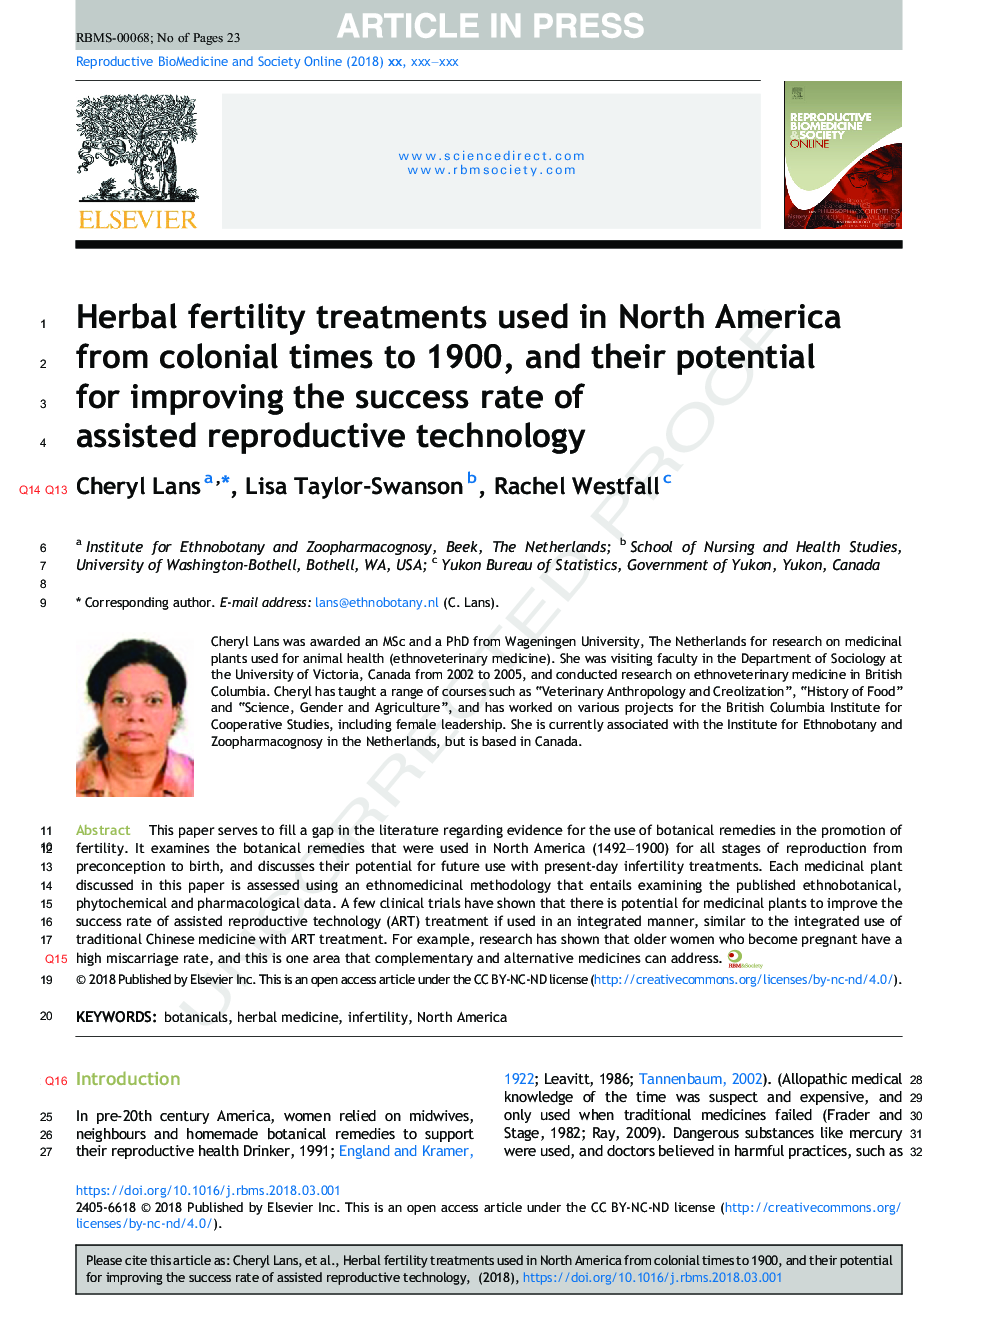 Herbal fertility treatments used in North America from colonial times to 1900, and their potential for improving the success rate of assisted reproductive technology